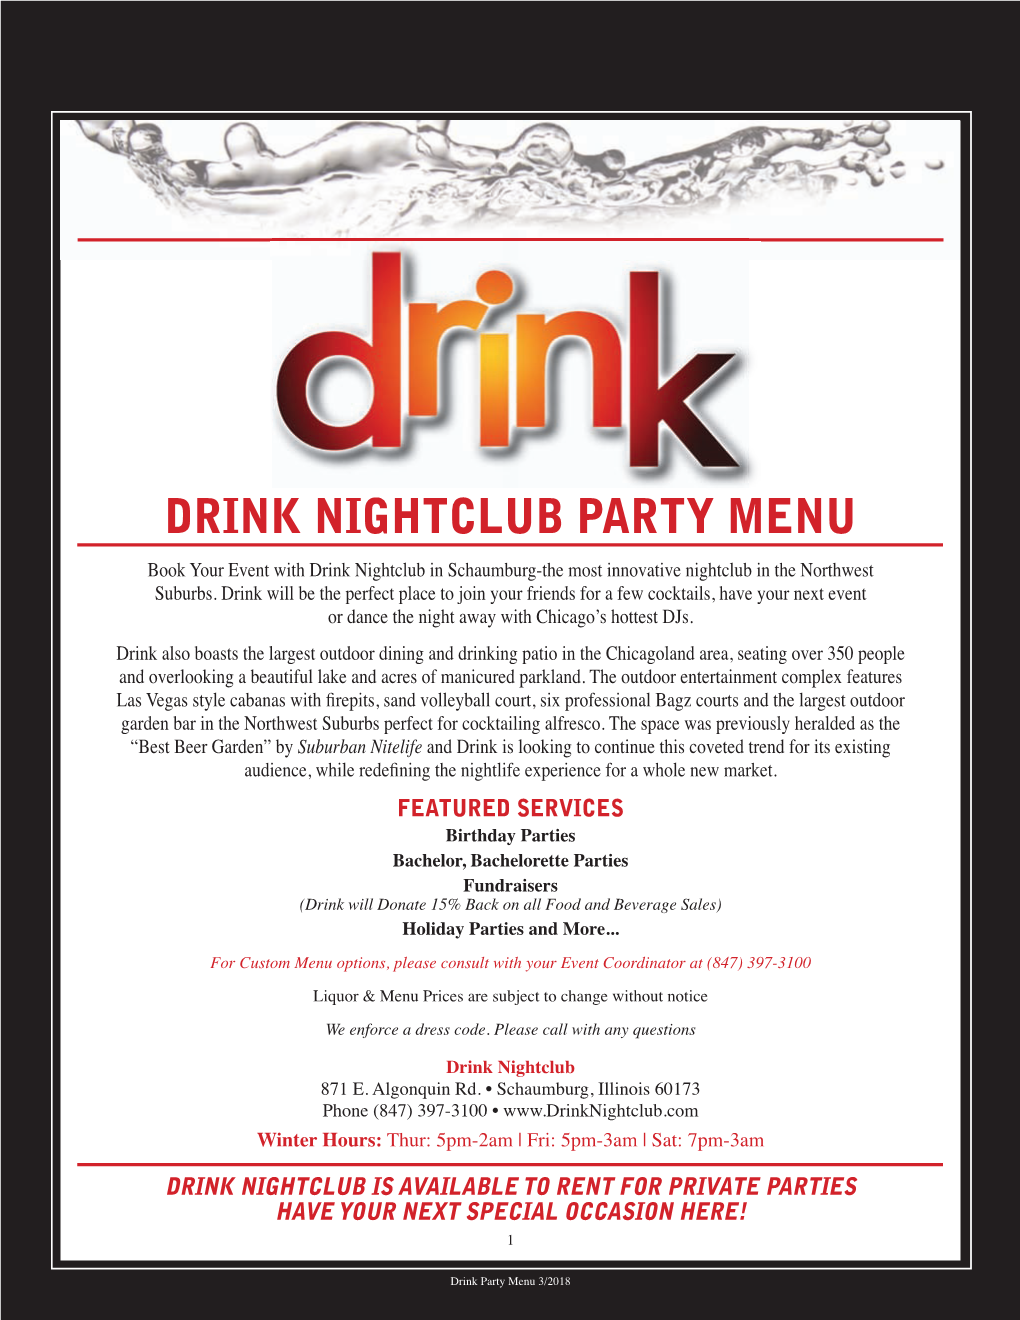 DRINK NIGHTCLUB PARTY MENU Book Your Event with Drink Nightclub in Schaumburg-The Most Innovative Nightclub in the Northwest Suburbs